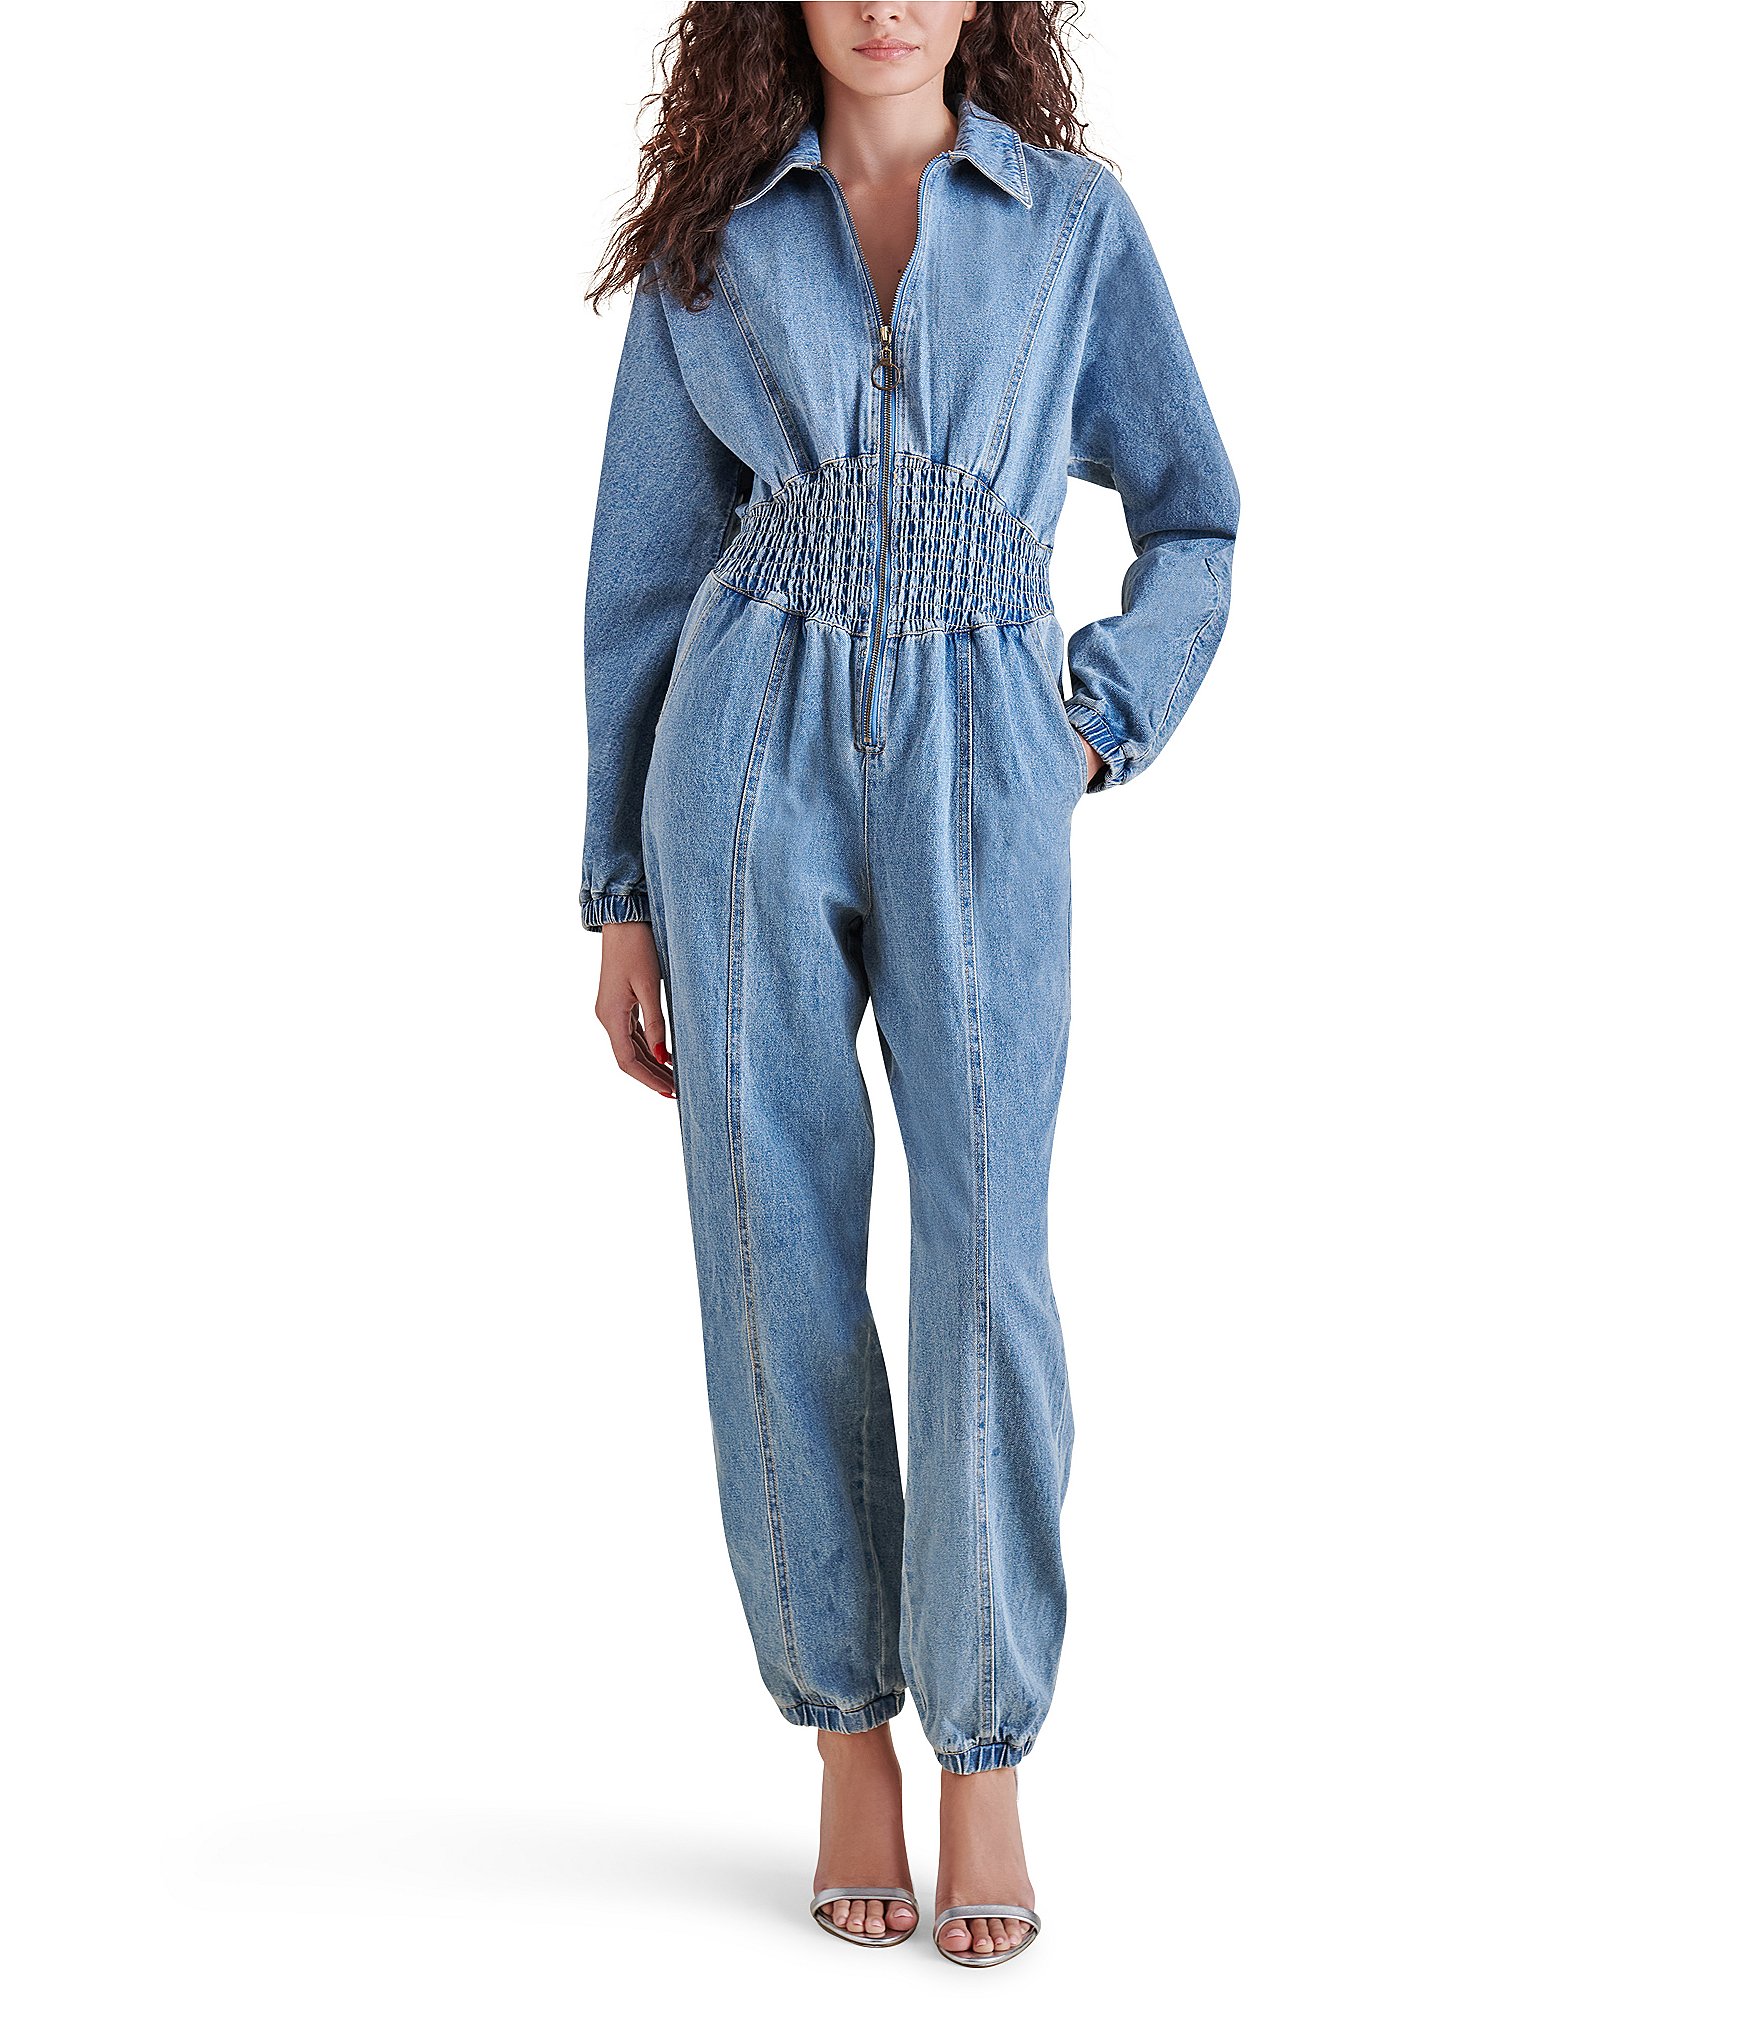 Petite Jumpsuit With Lace Sleeve – NY COLLECTION